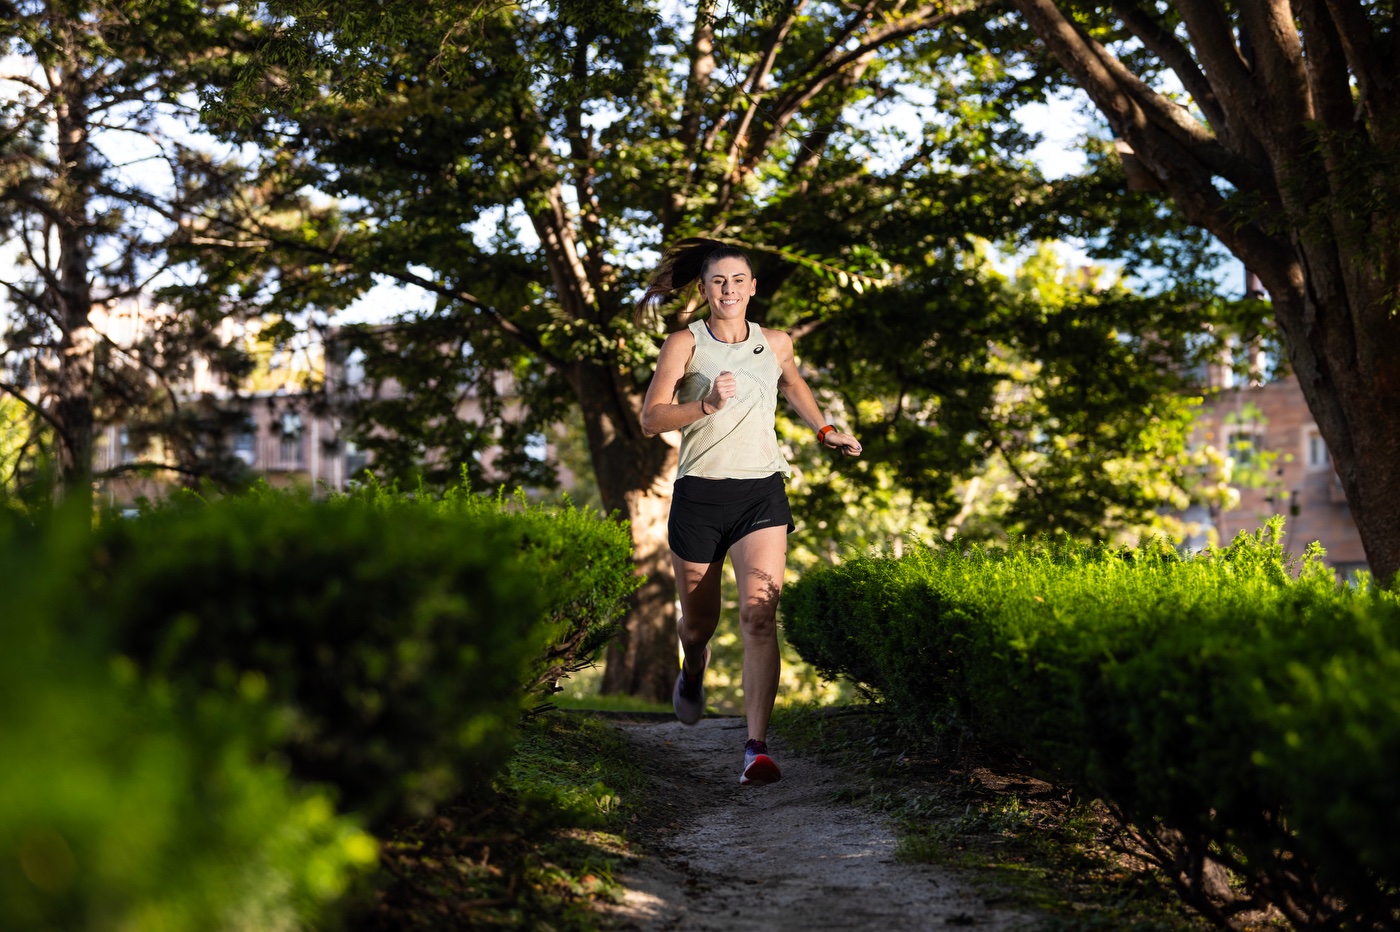 Northeastern graduate Laura Green, a comedic content creator and runner, runs through the Boston campus on Wednesday, Sept. 20, 2023. Photo by Alyssa Stone/Northeastern University